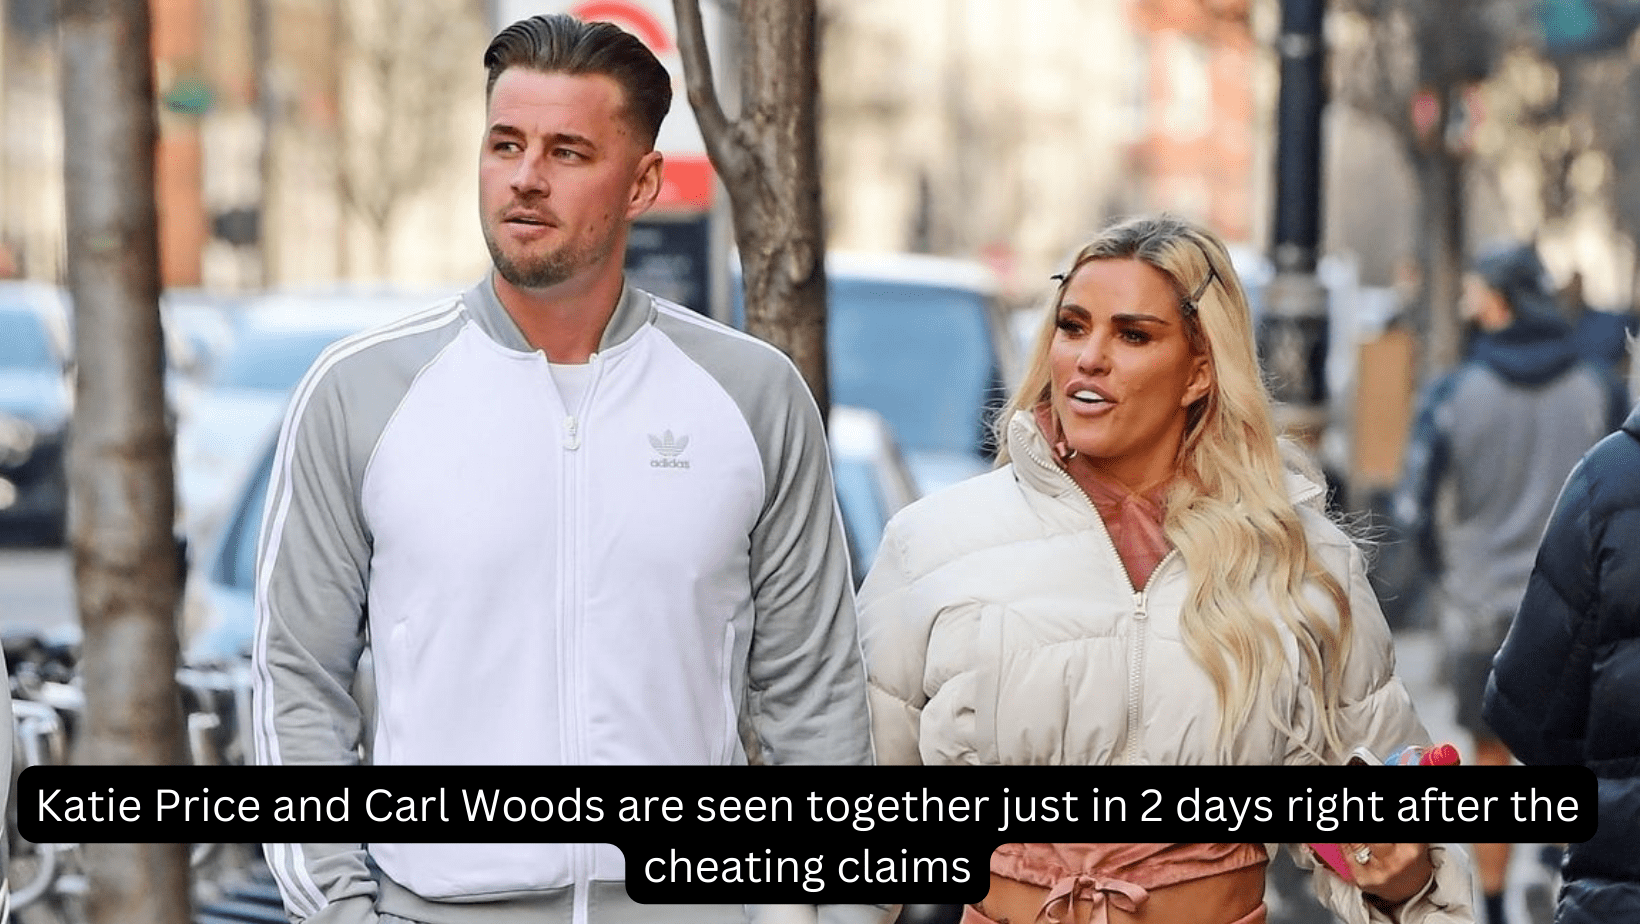 Katie Price and Carl Woods are seen together just in 2 days right after the cheating claims